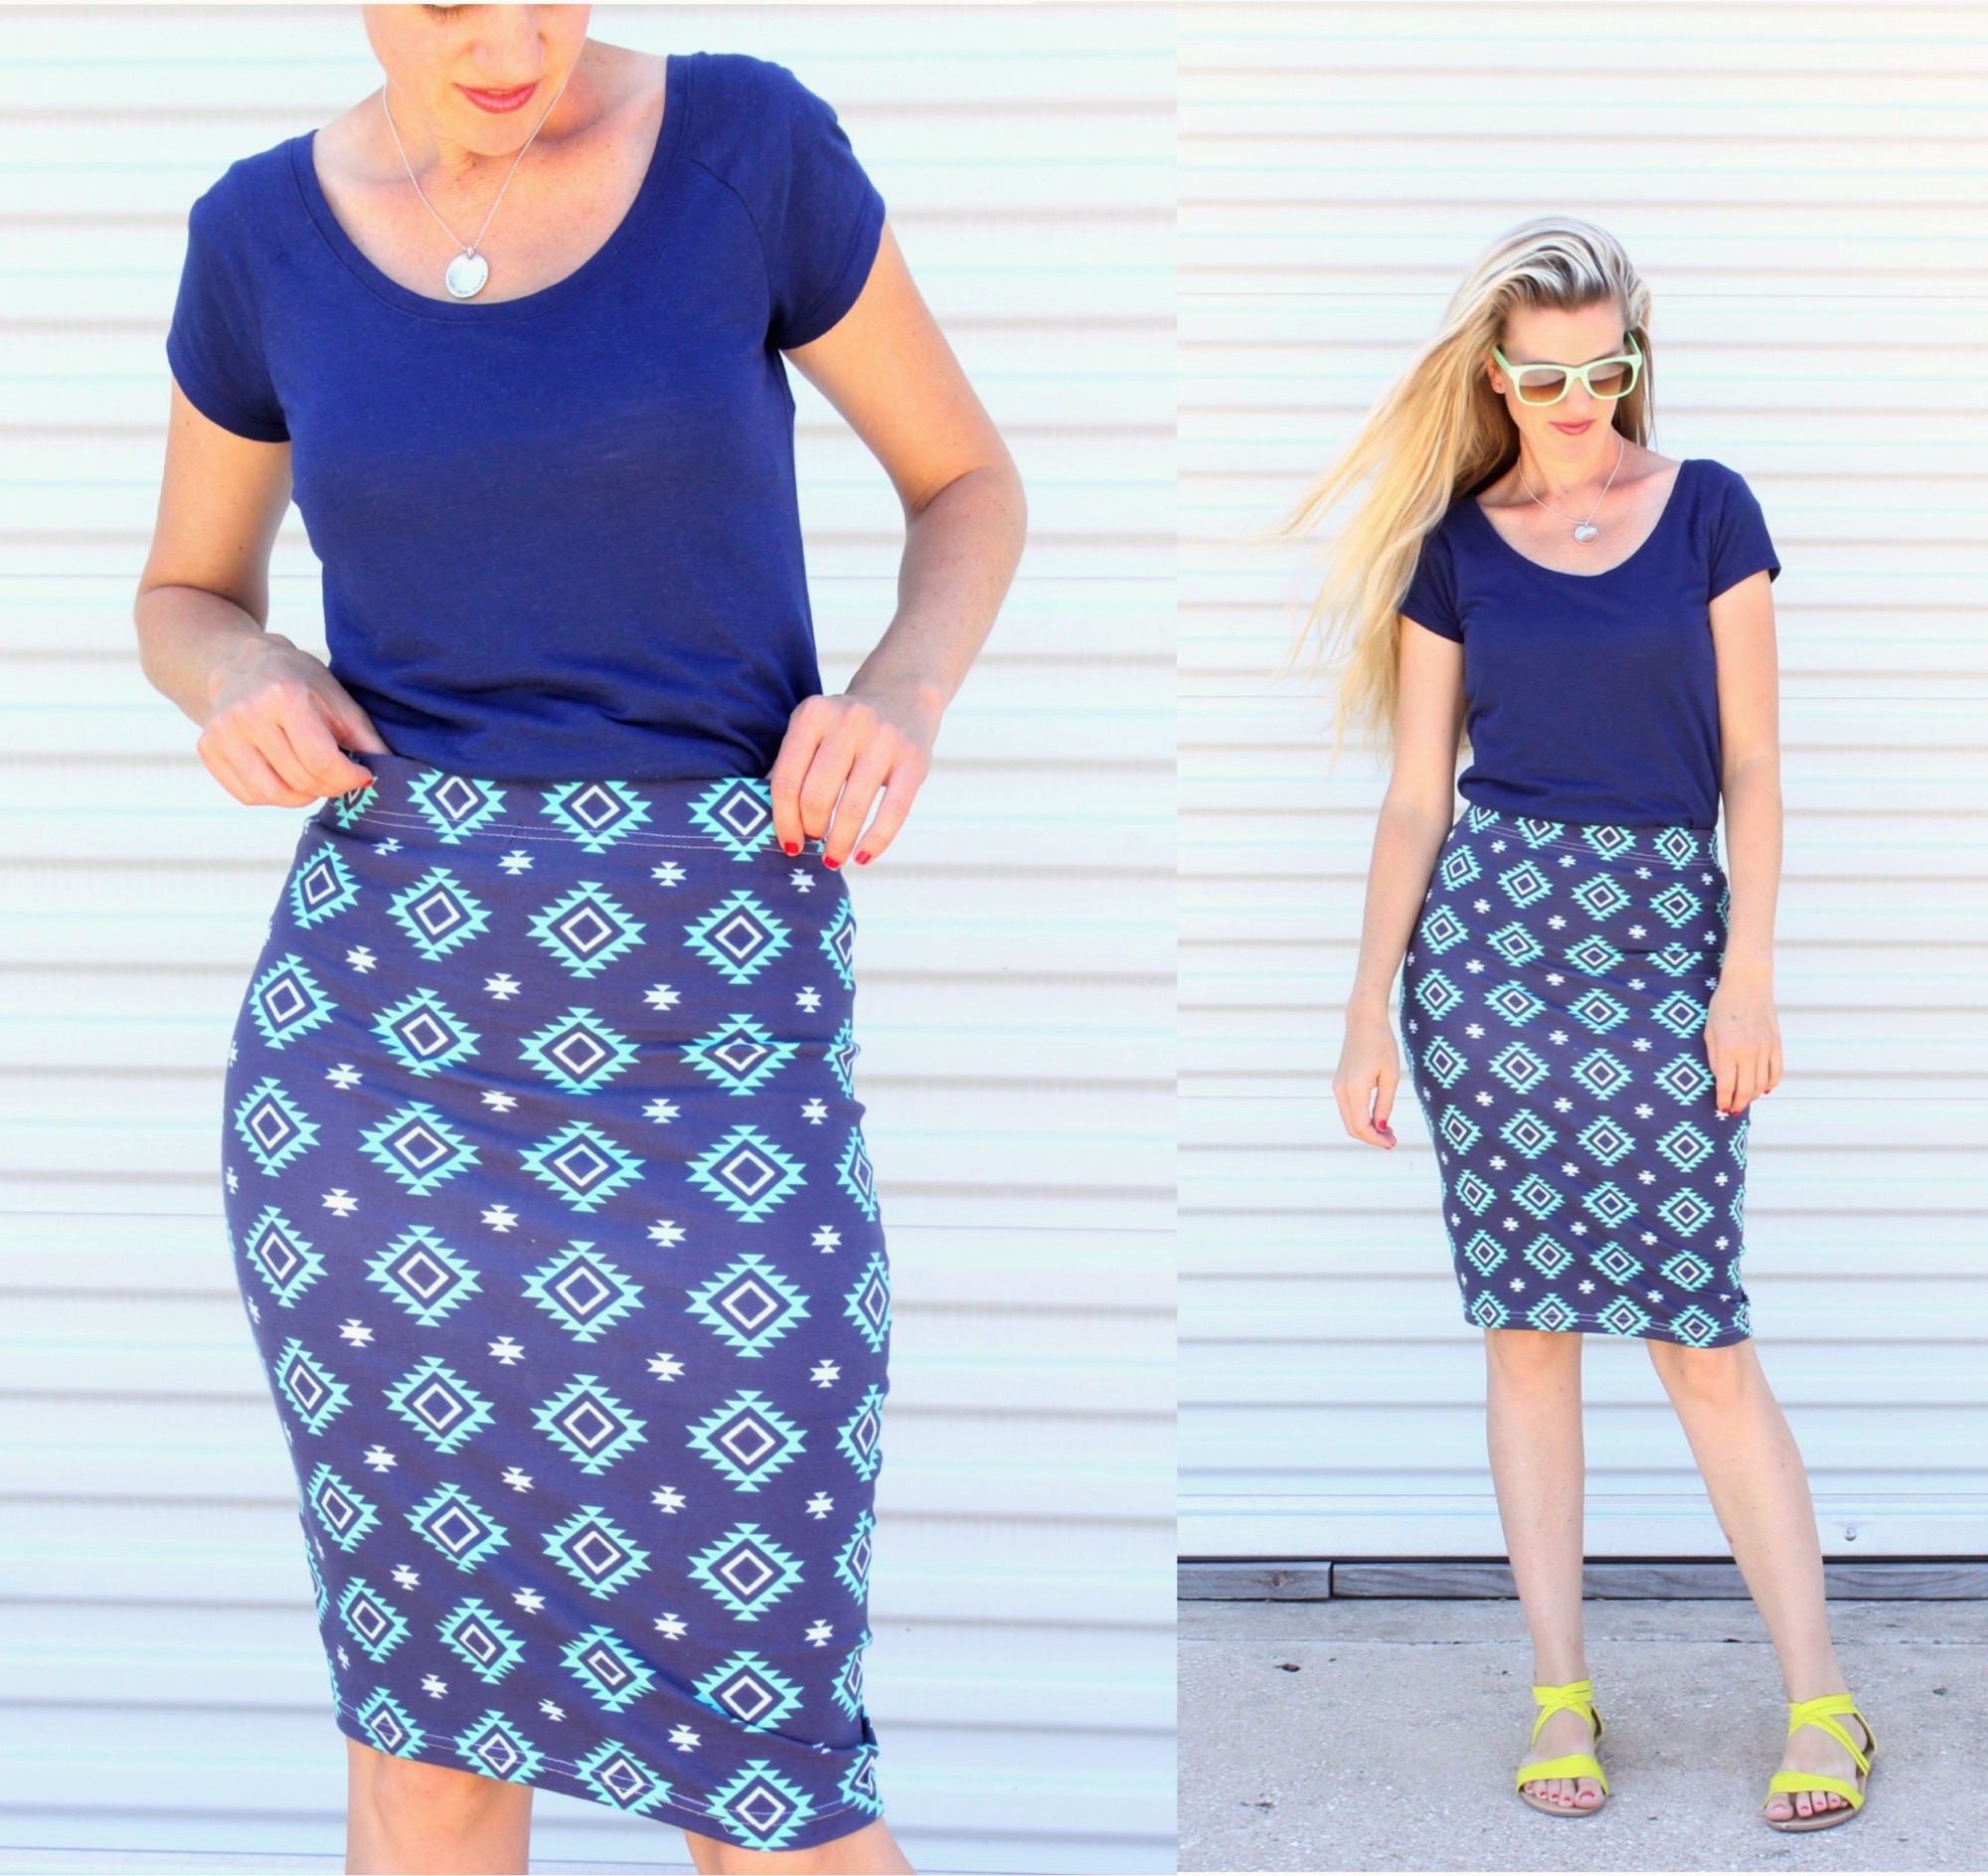 my new pencil skirt + 60 skirts for girls in foster care - MADE EVERYDAY